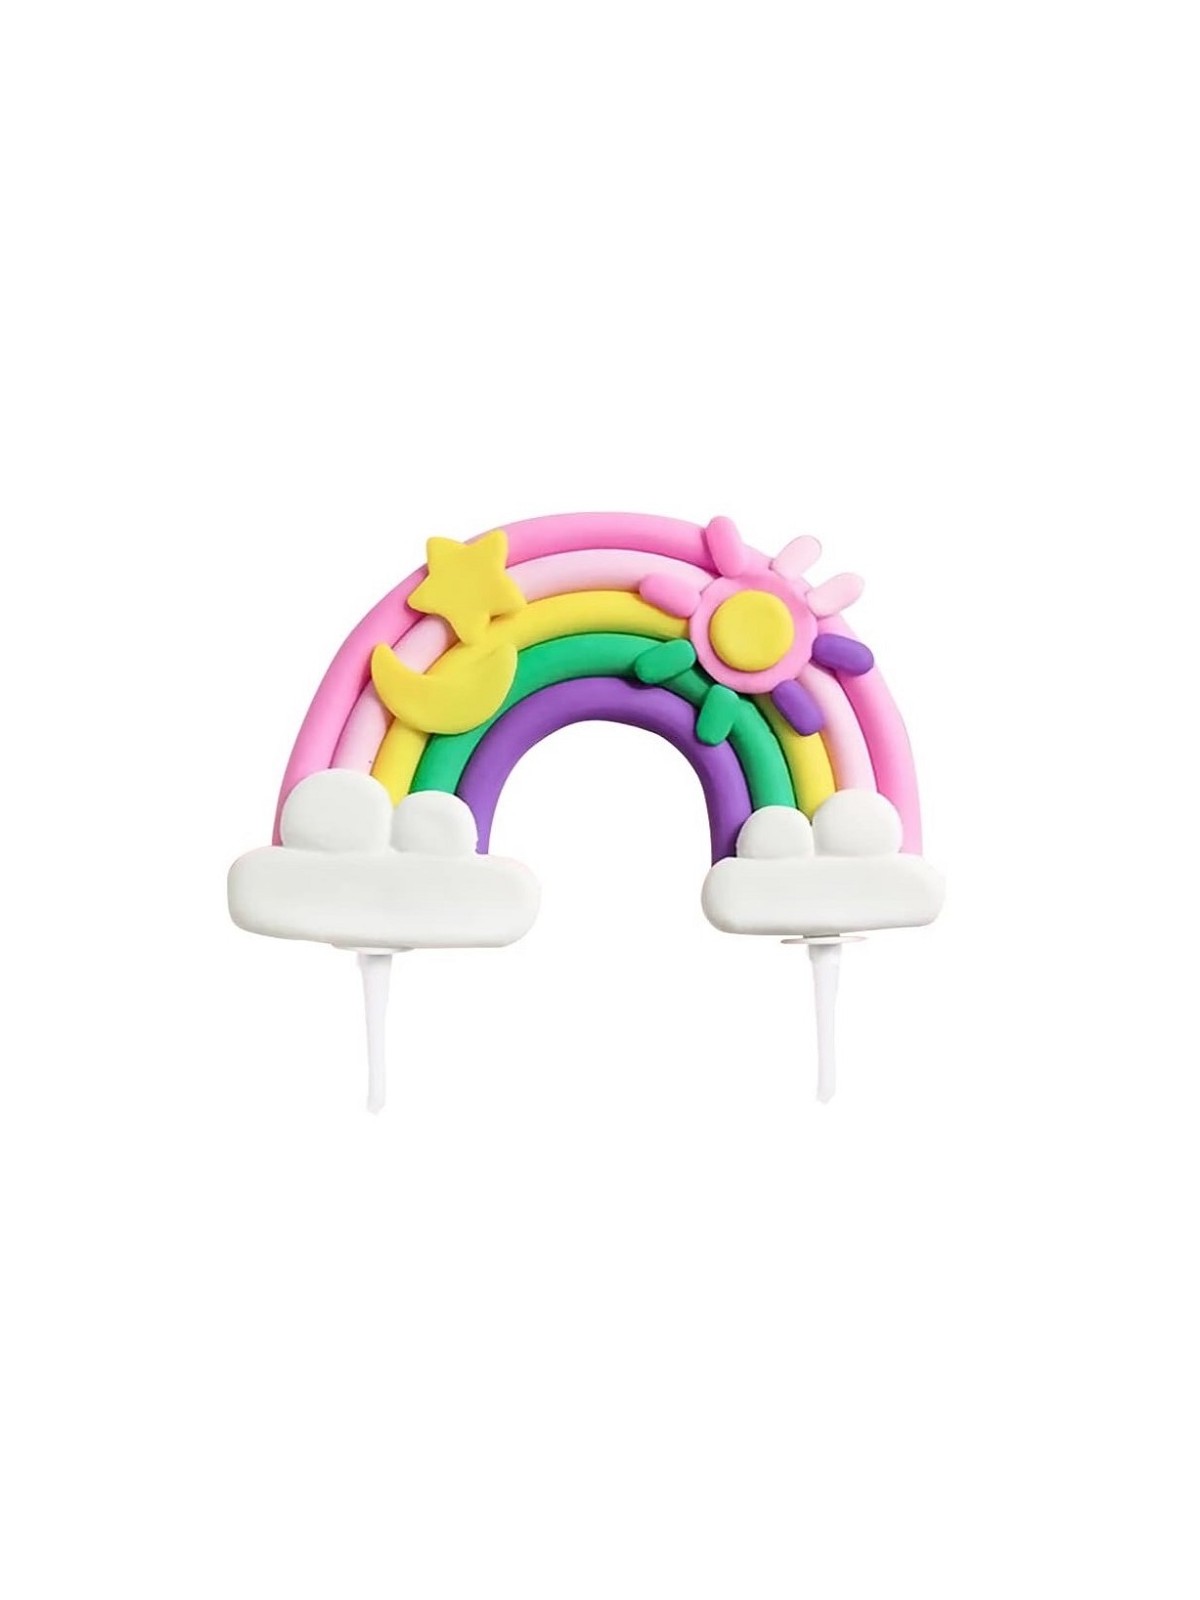 Cake topper - decorated rainbow